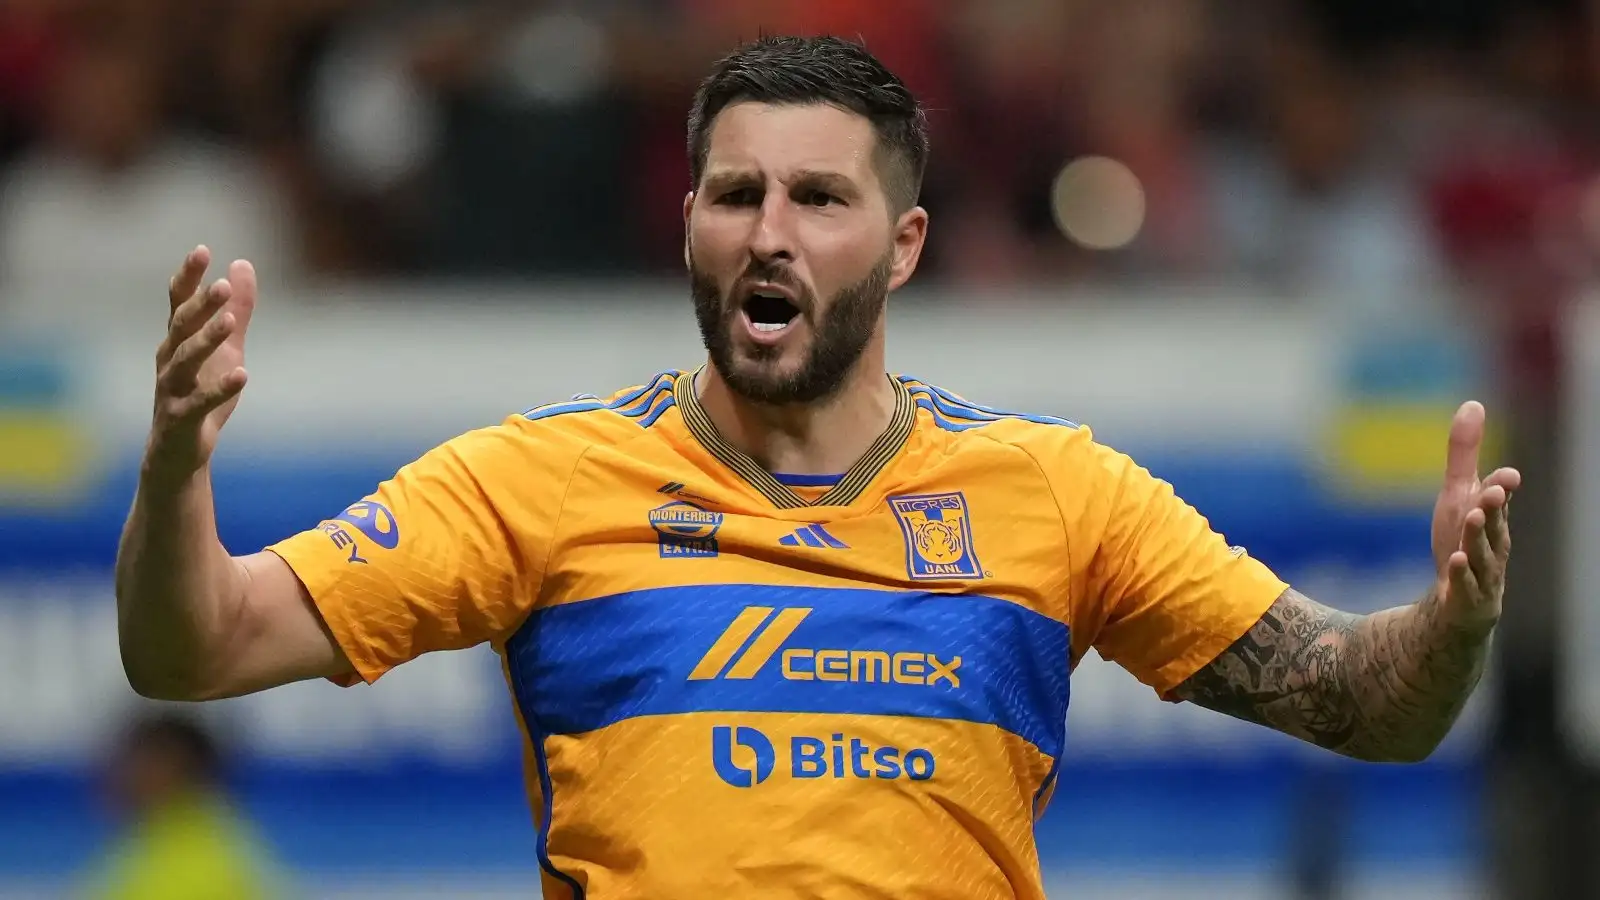 Andre-Pierre Gignac: The anti-footballing hero living the dream in the Mexican sunset